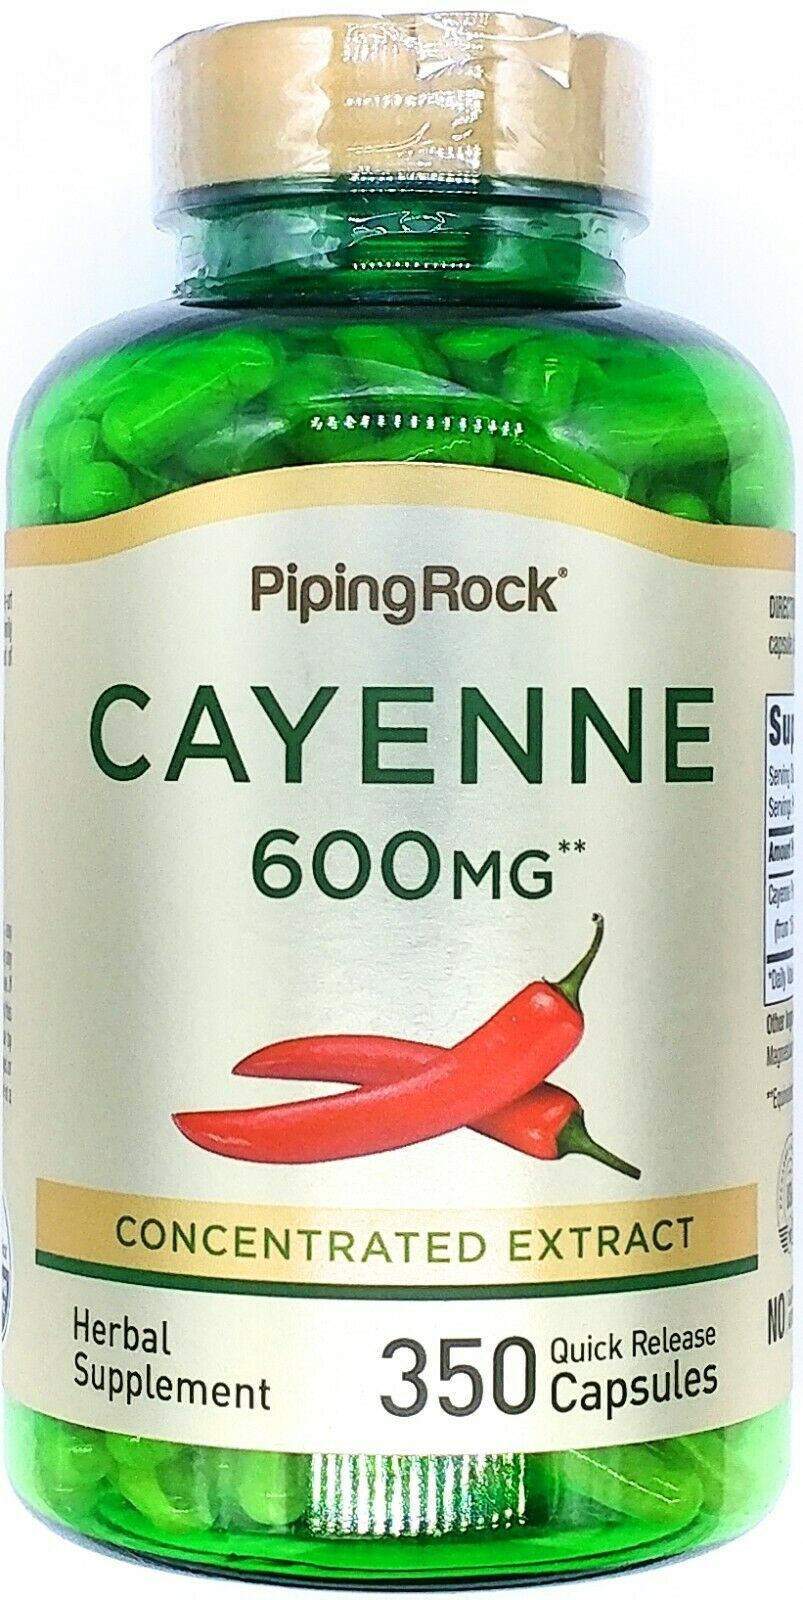 600mg Cayenne Concentrated Extract 350 Quick Release Capsules